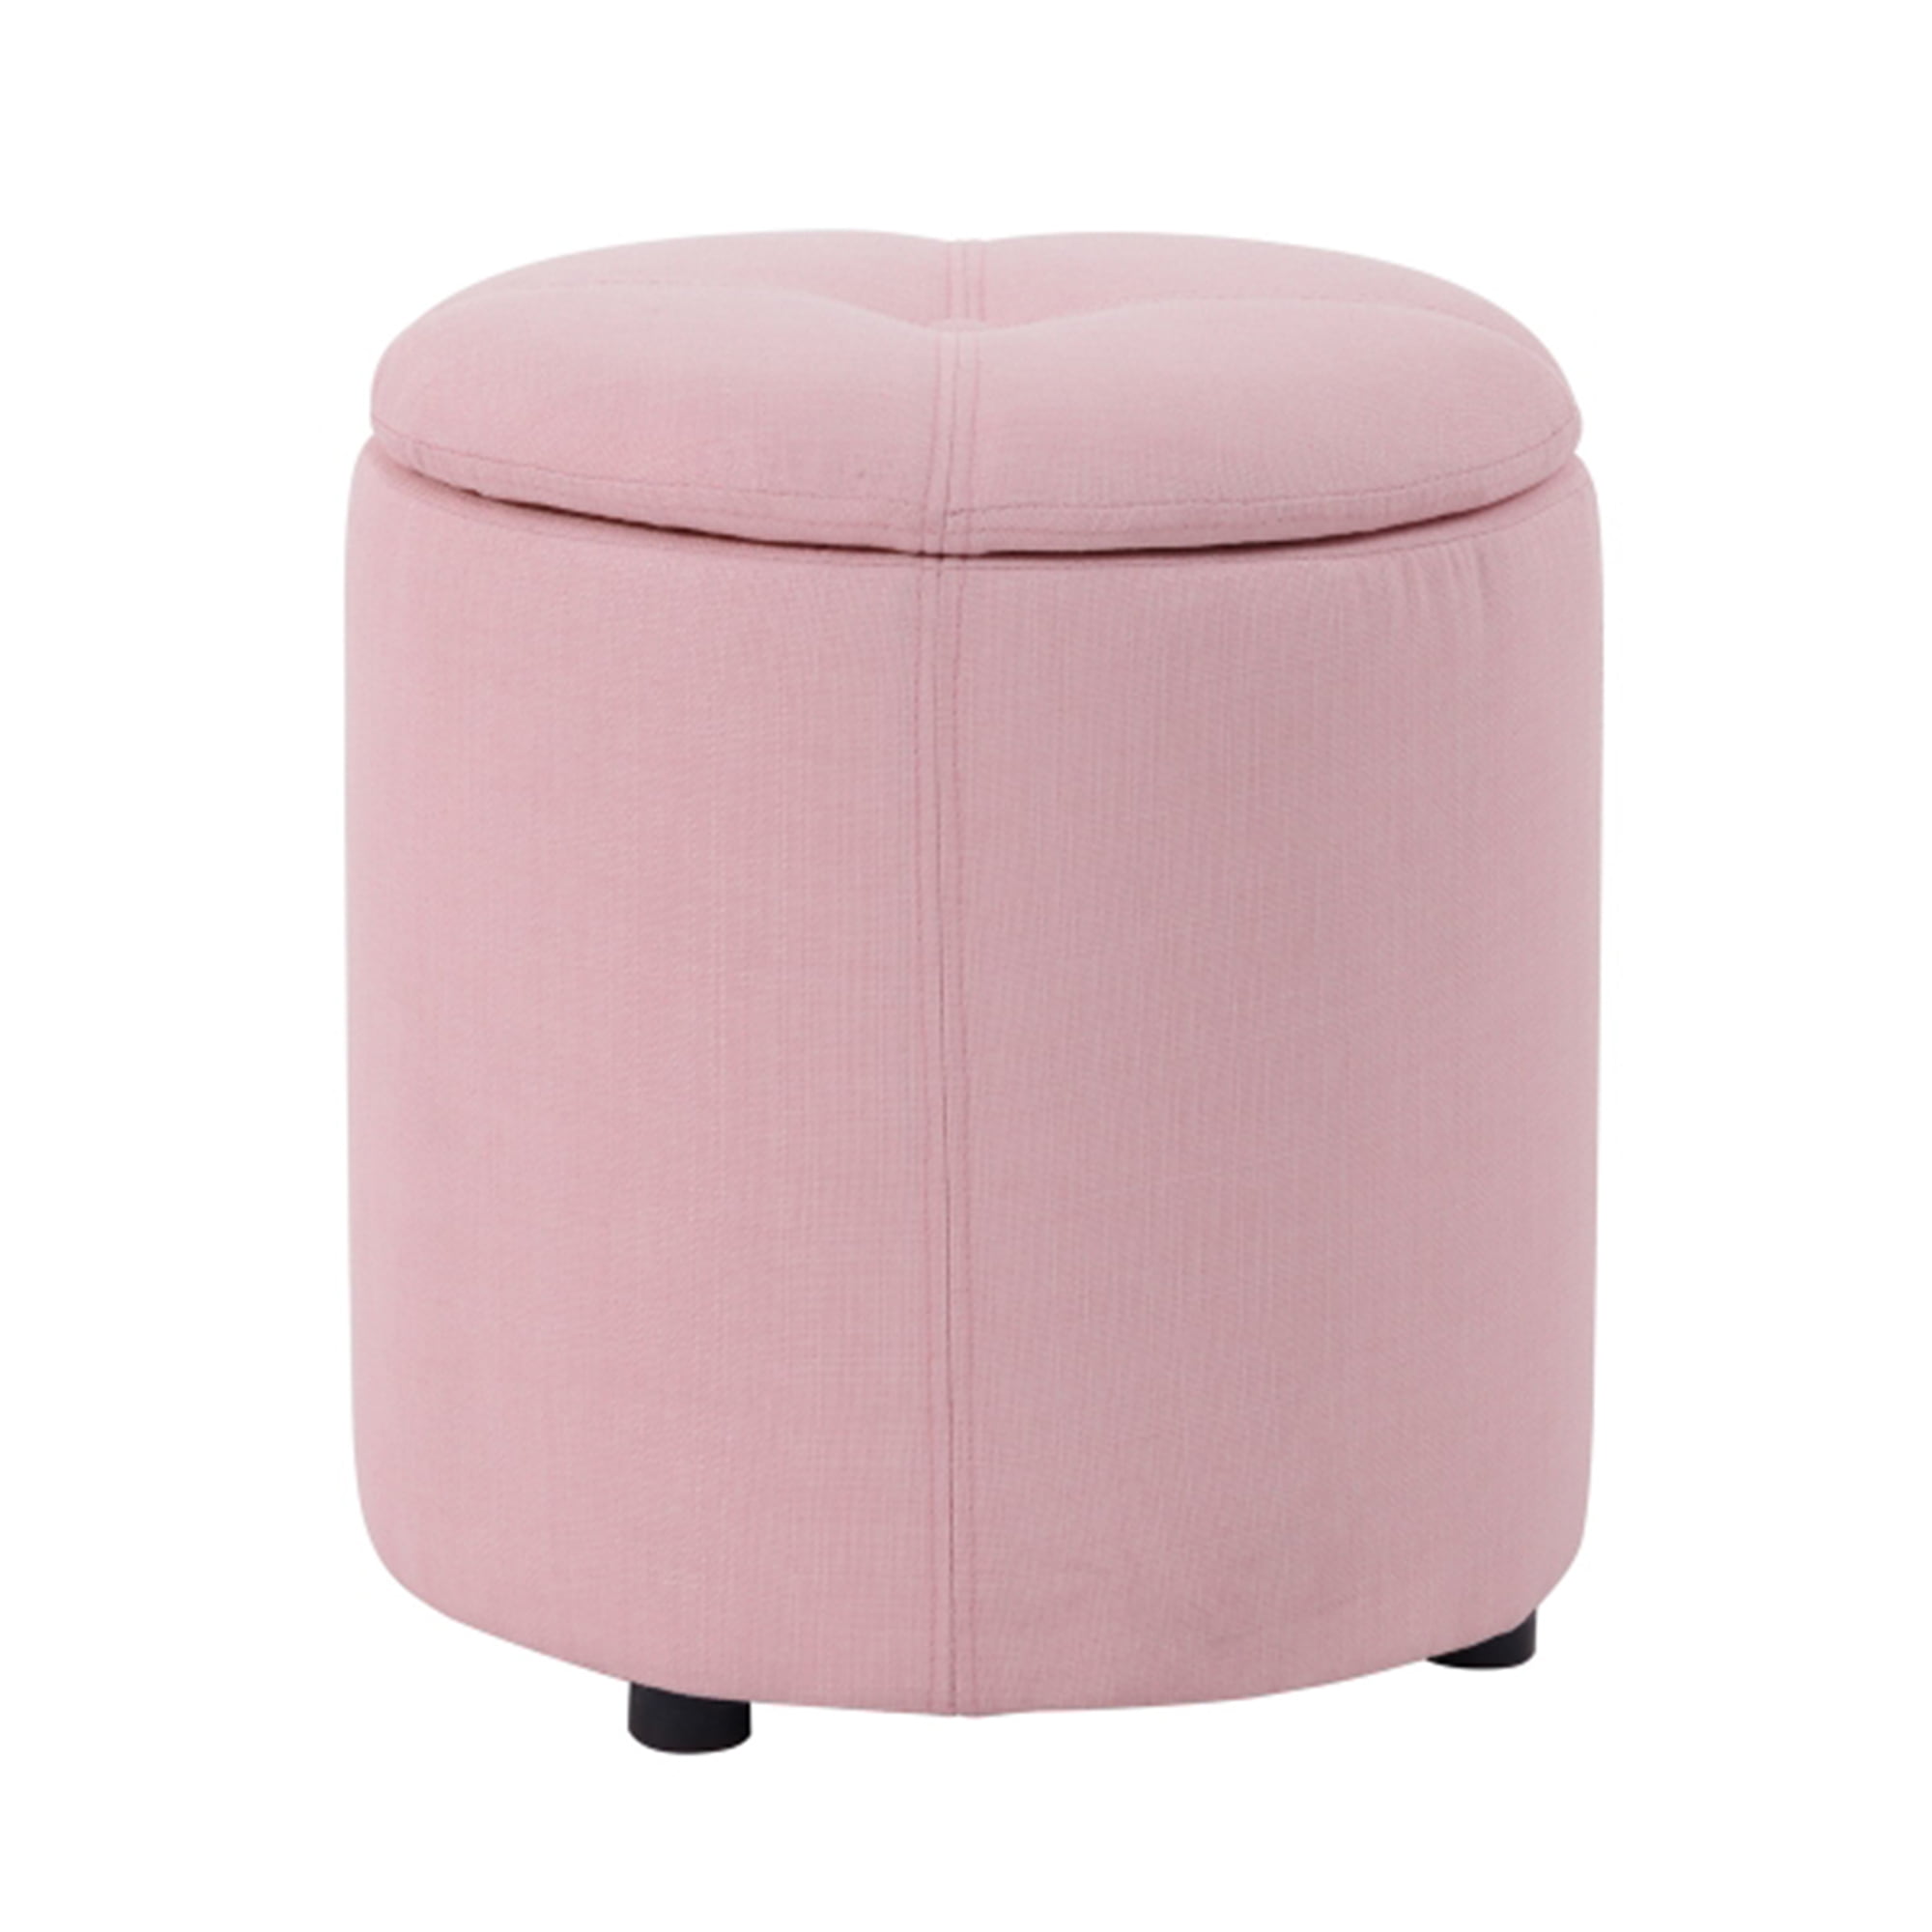 Upholstered Round Modern Ottoman Cushion Padded Large Capacity Storage Stool for Living Room